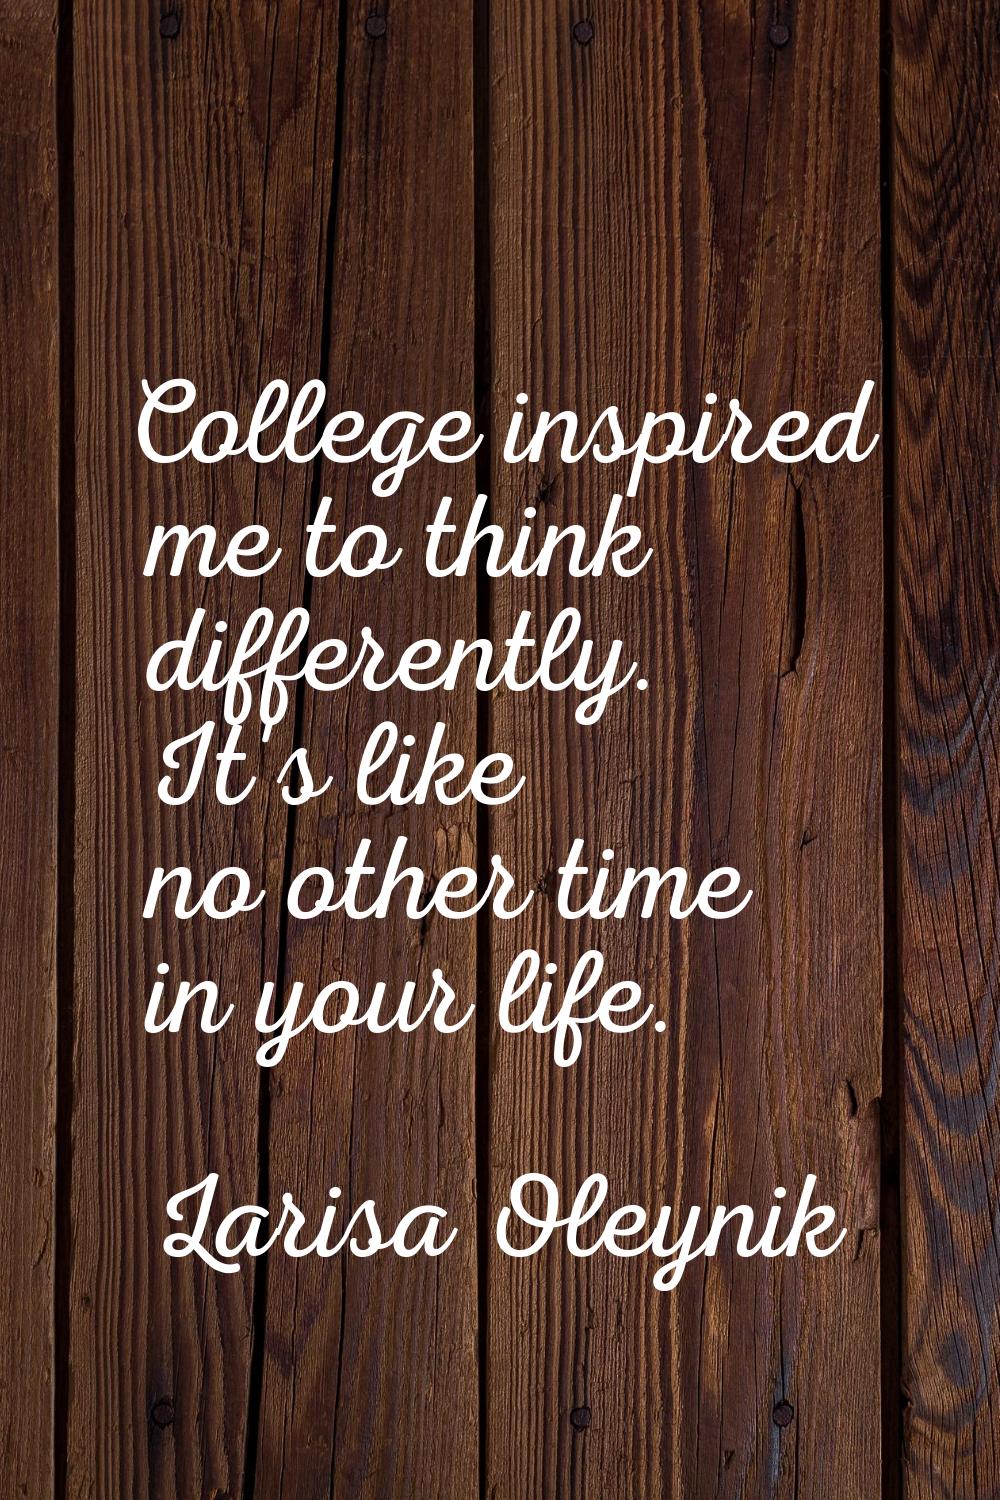 College inspired me to think differently. It's like no other time in your life.